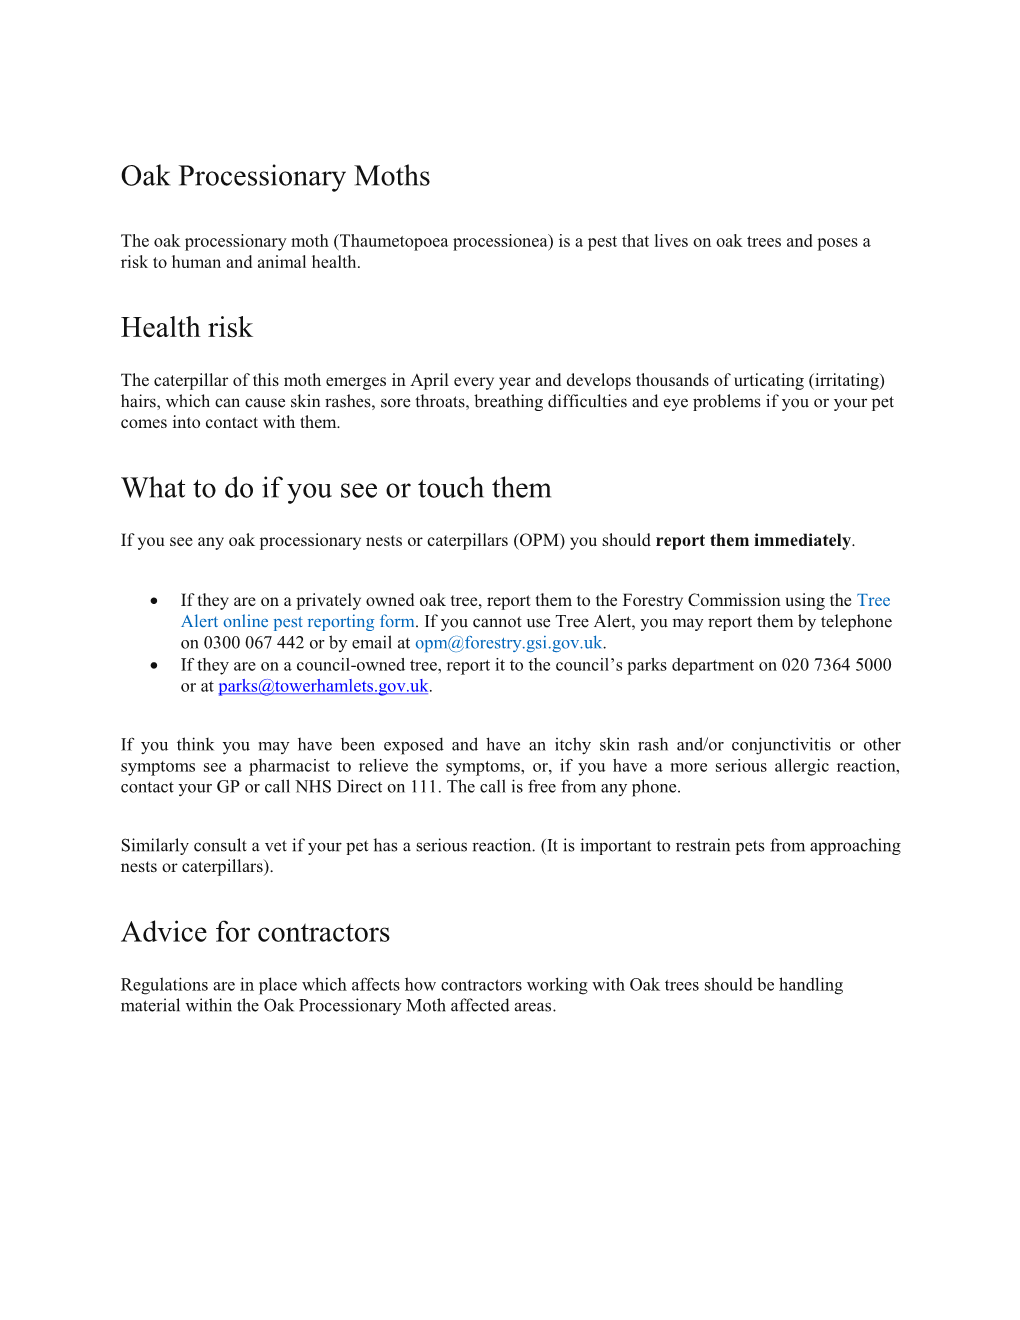 Oak Processionary Moths Health Risk What to Do If You See Or Touch Them